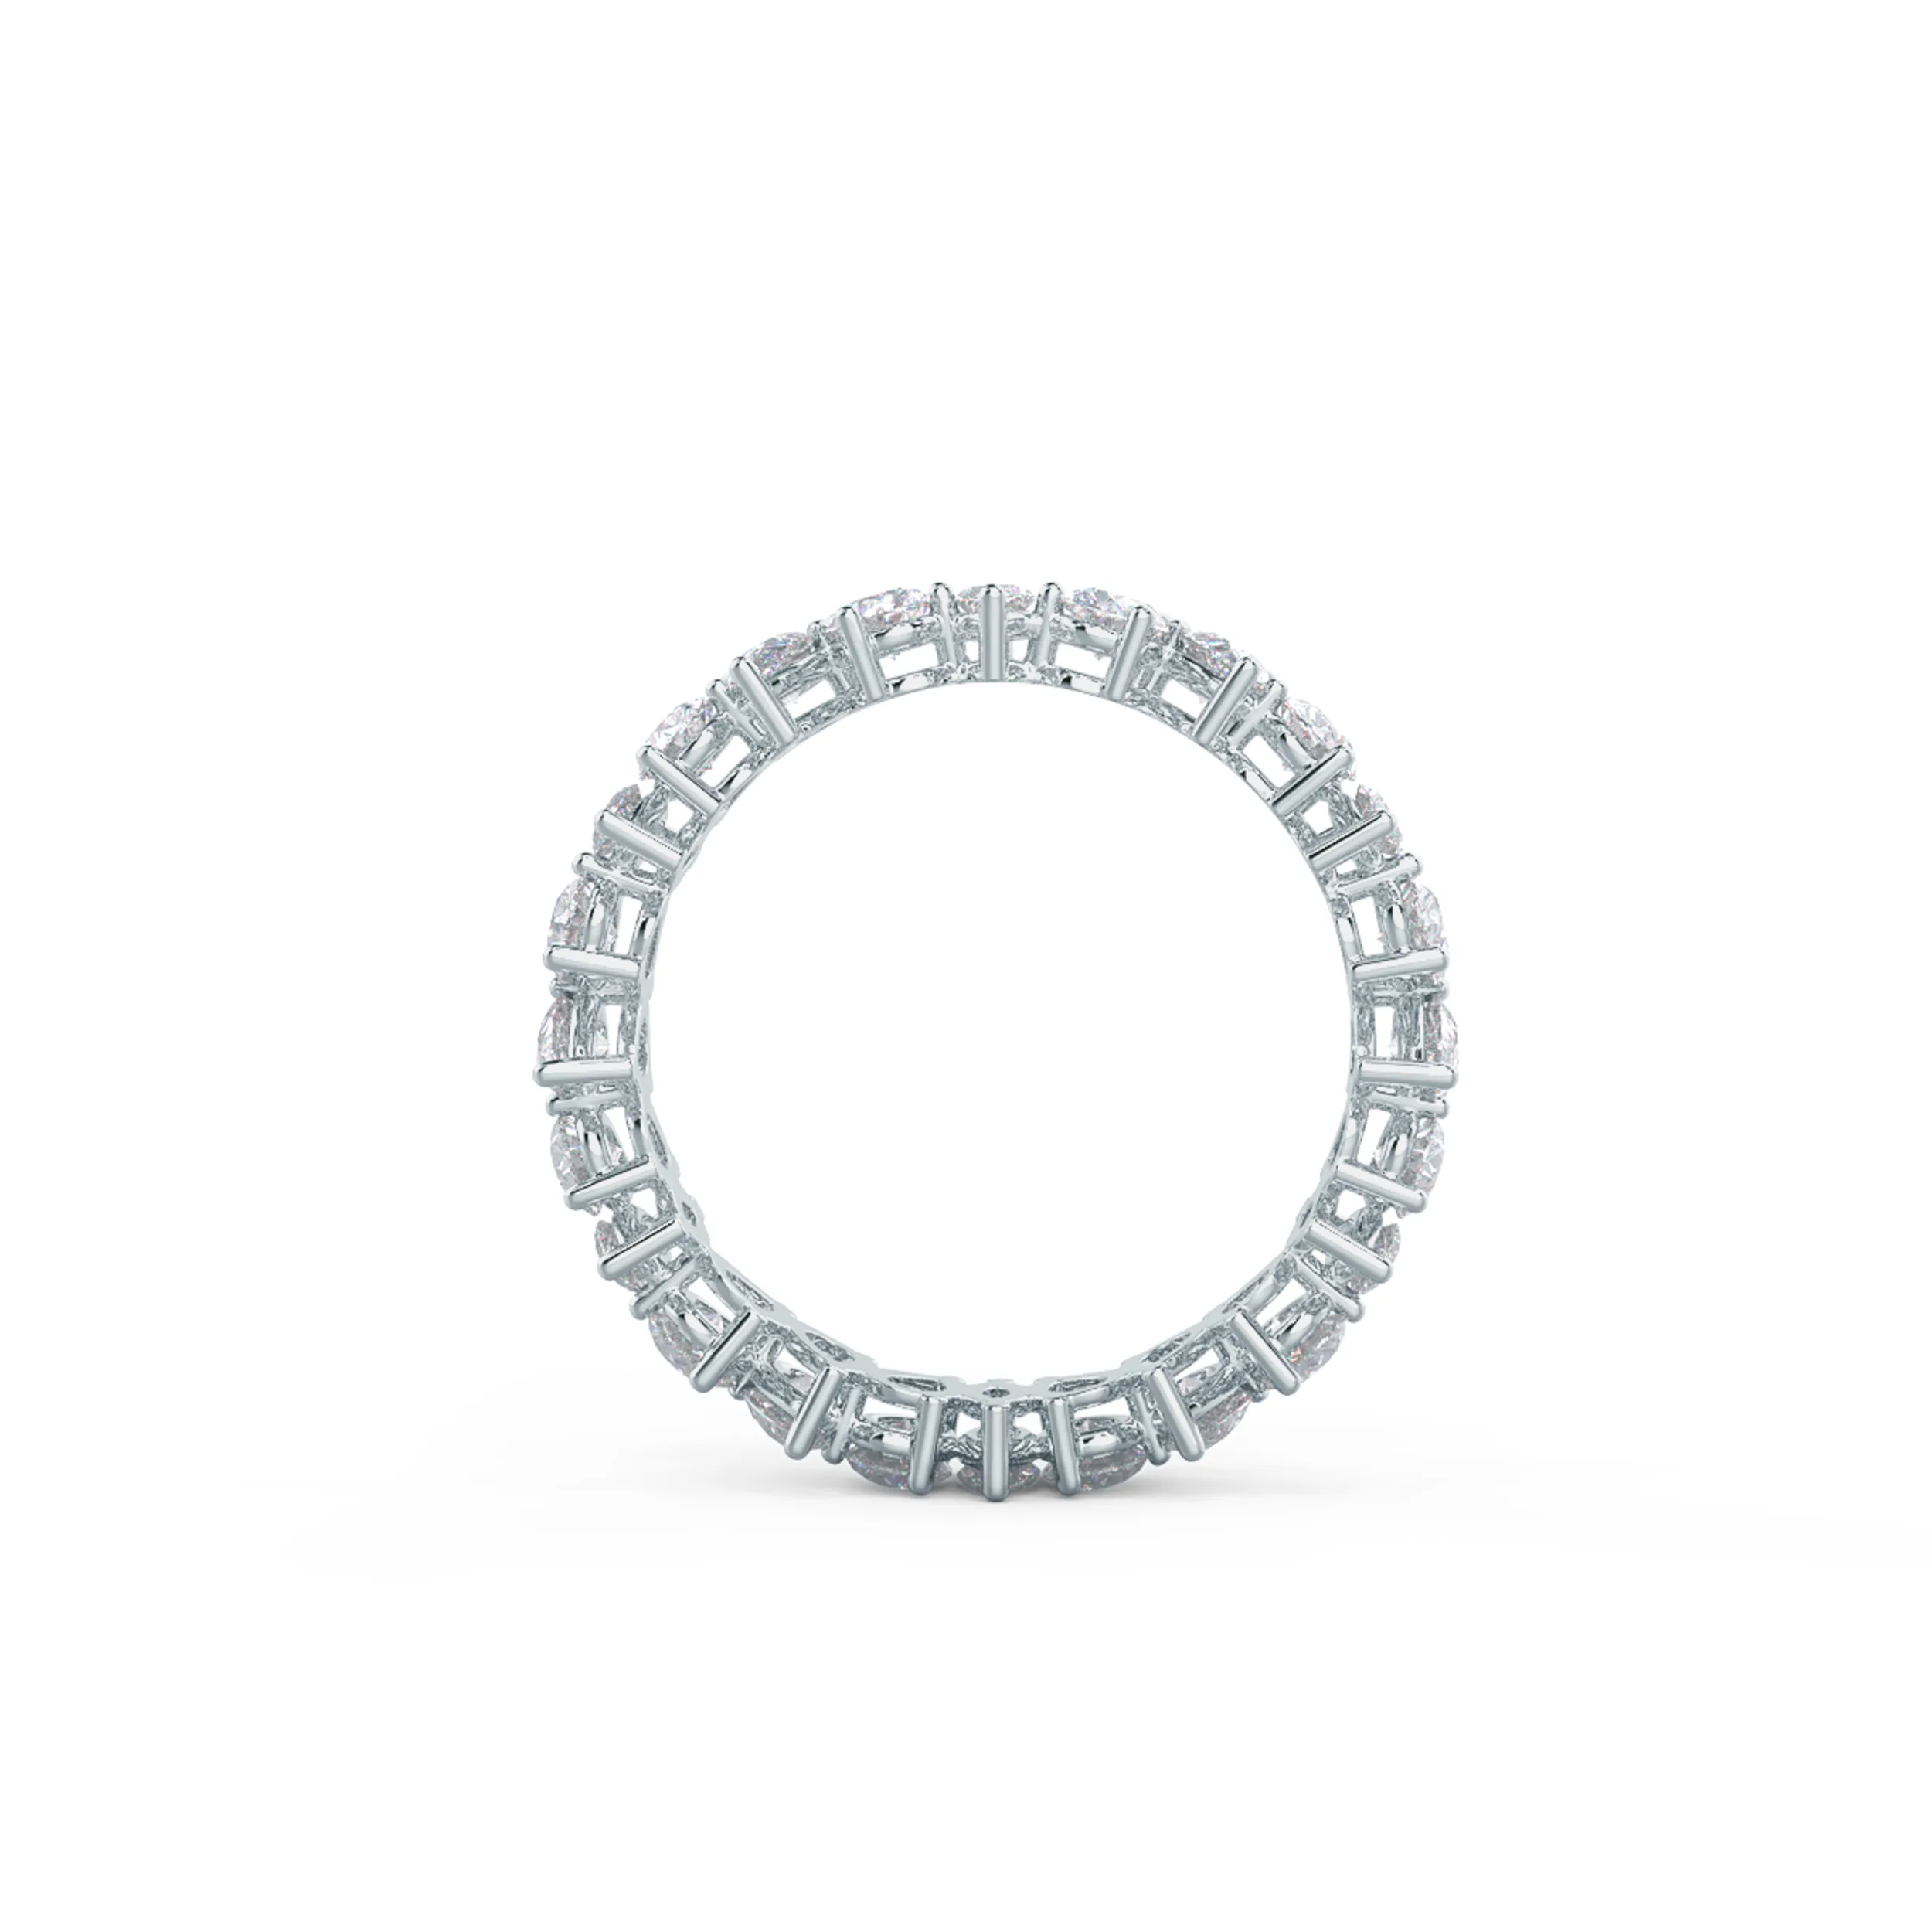 18kt White Gold Lauren Eternity Band featuring Exceptional Quality 2.0 ct Lab Diamonds (Profile View)